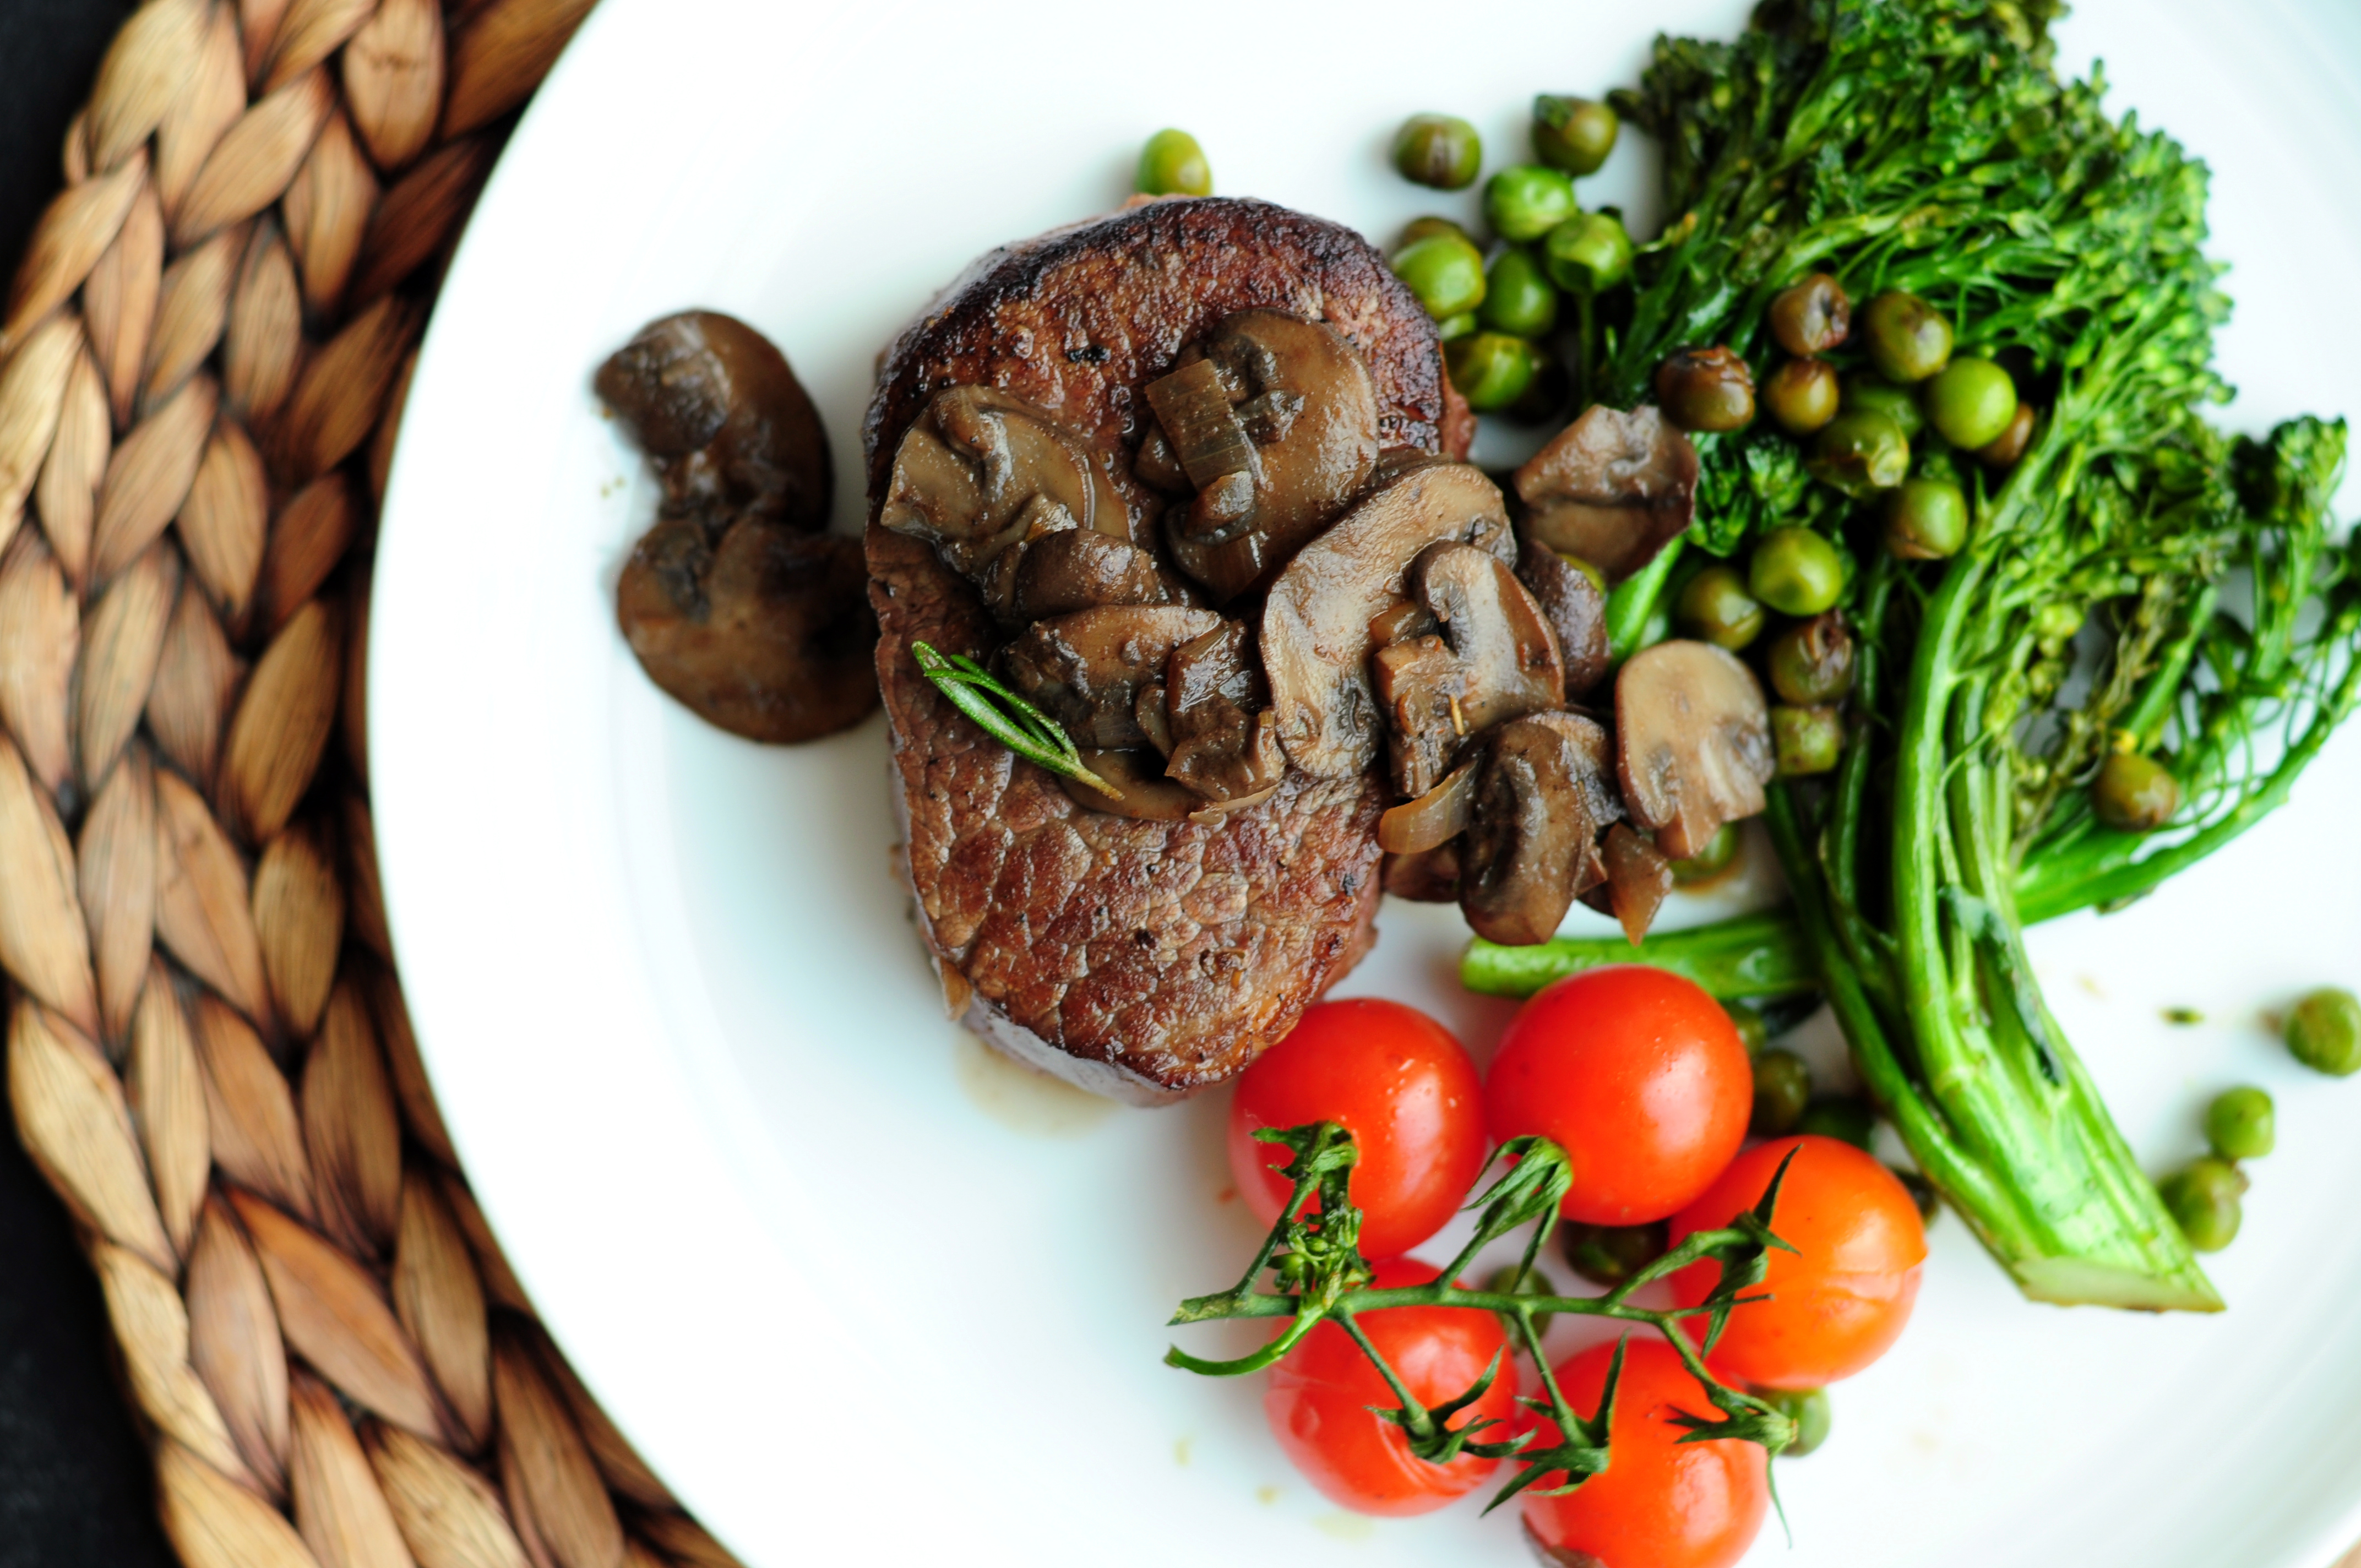 Sous Vide Filet Mignon with Mushroom Sauce-full meal